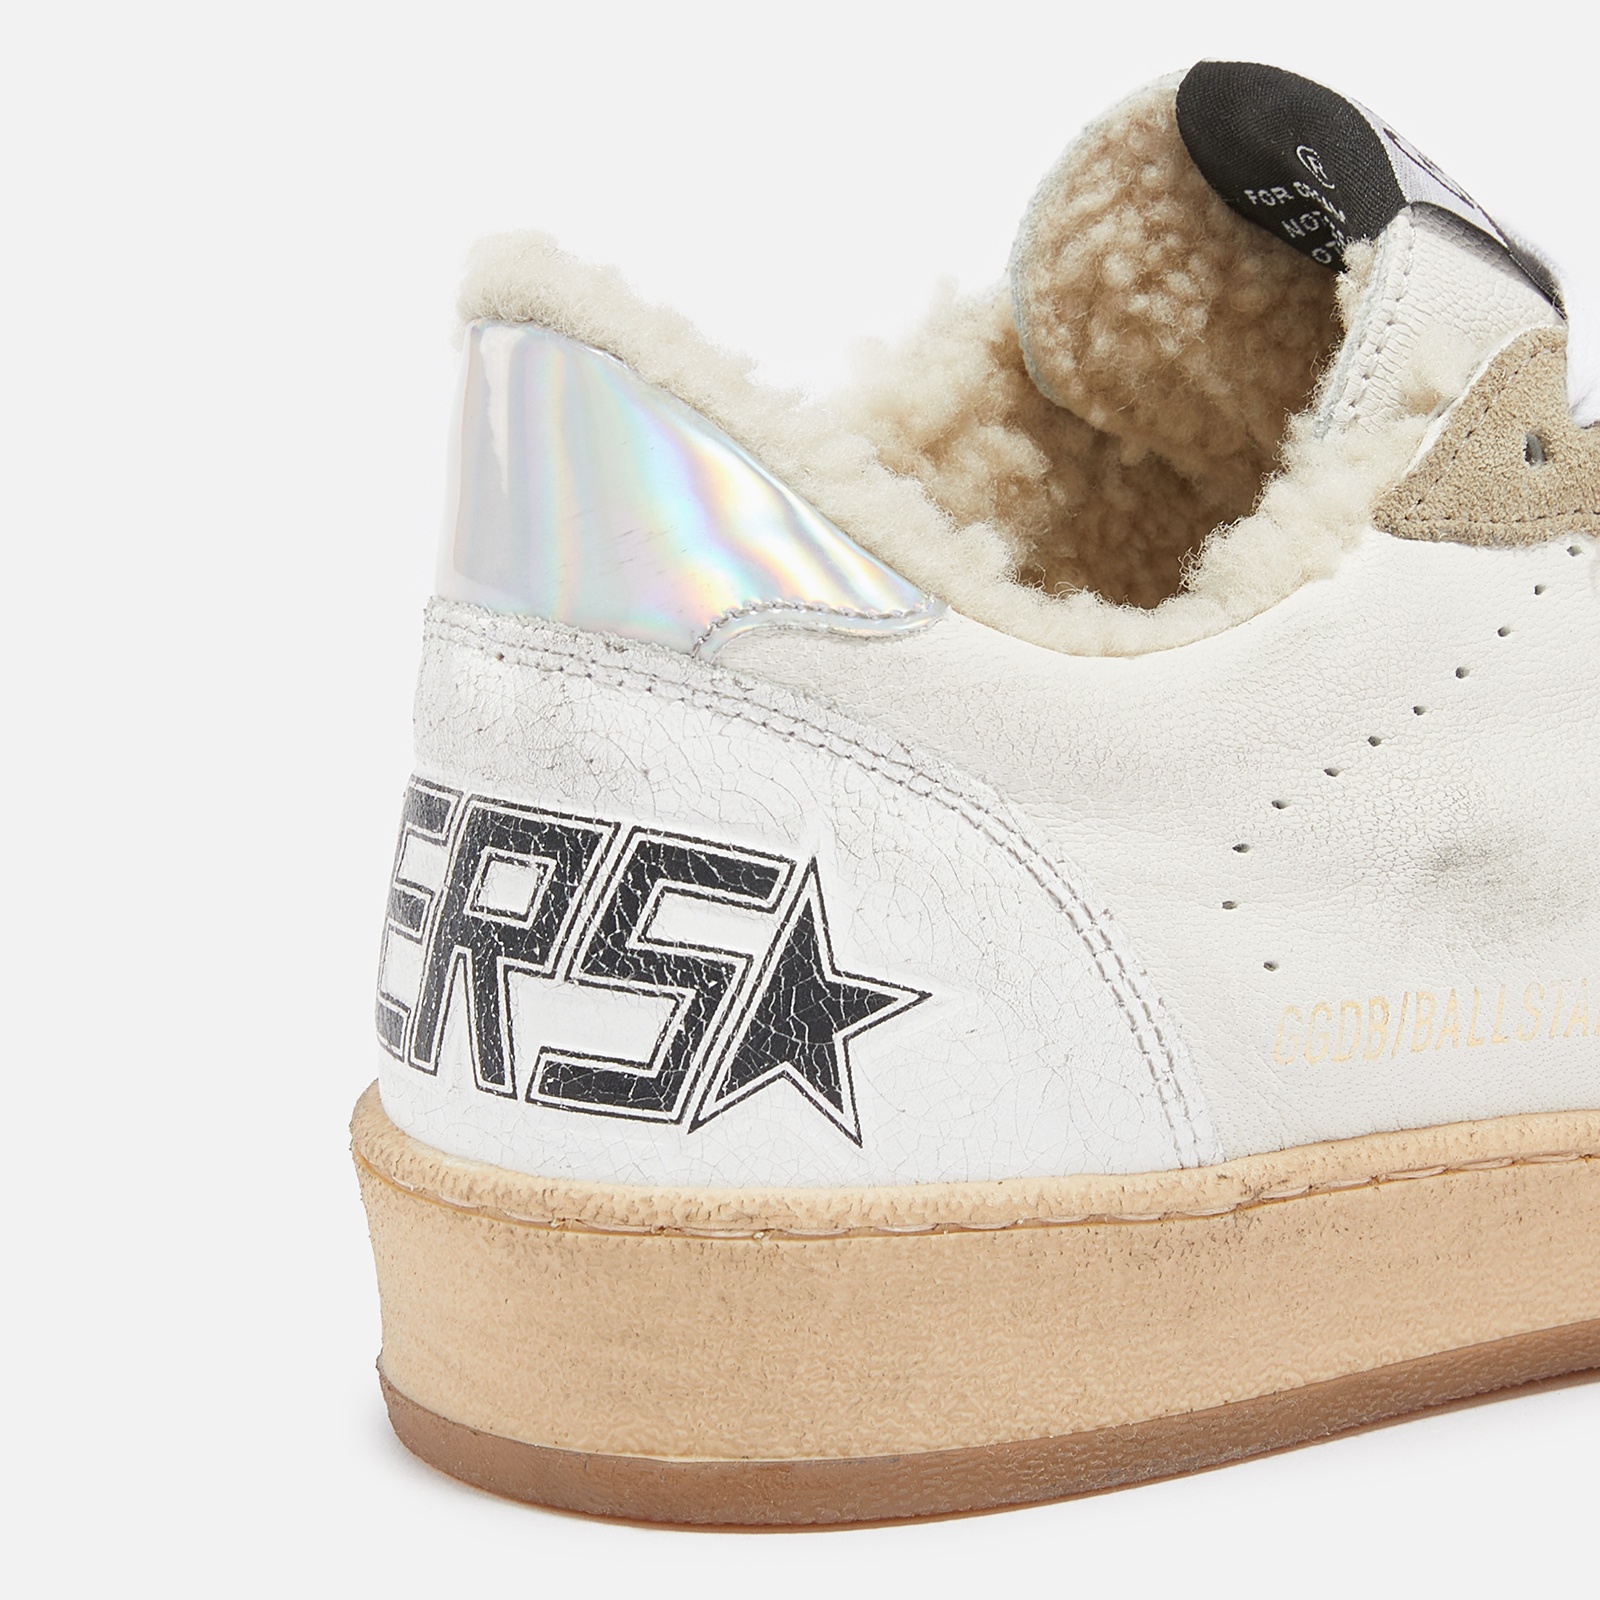 Golden Goose Women's Ball Star Shearling-Lined Leather Trainers - 4